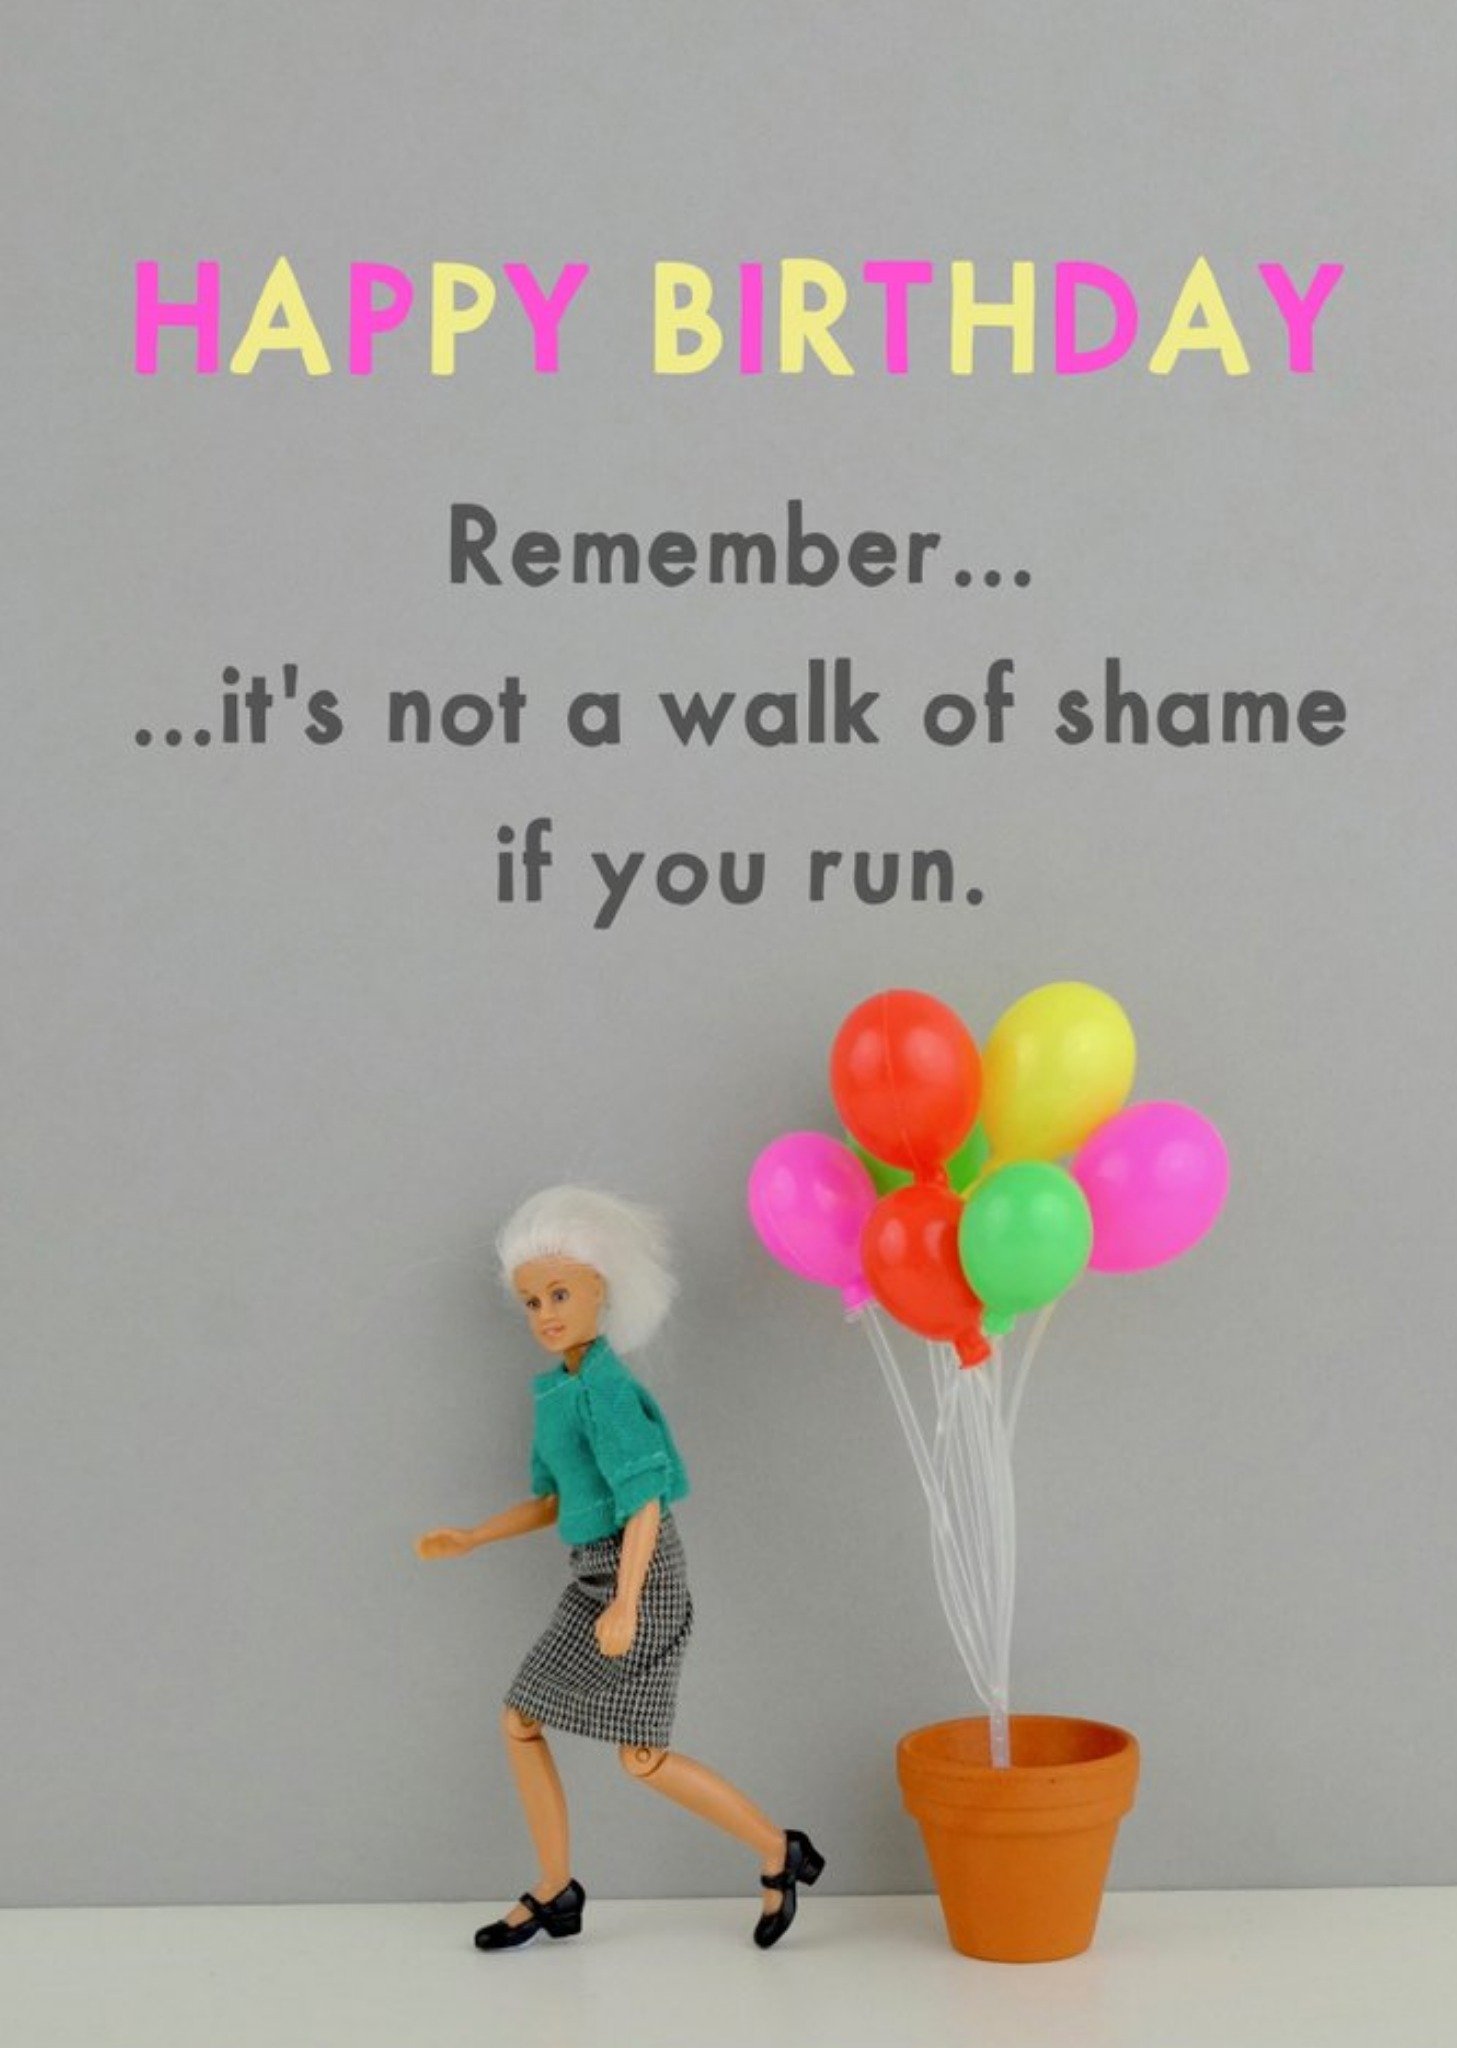 Bold And Bright Funny Dolls Remember It's Not A Walk Of Shame If You Run Birthday Card, Large